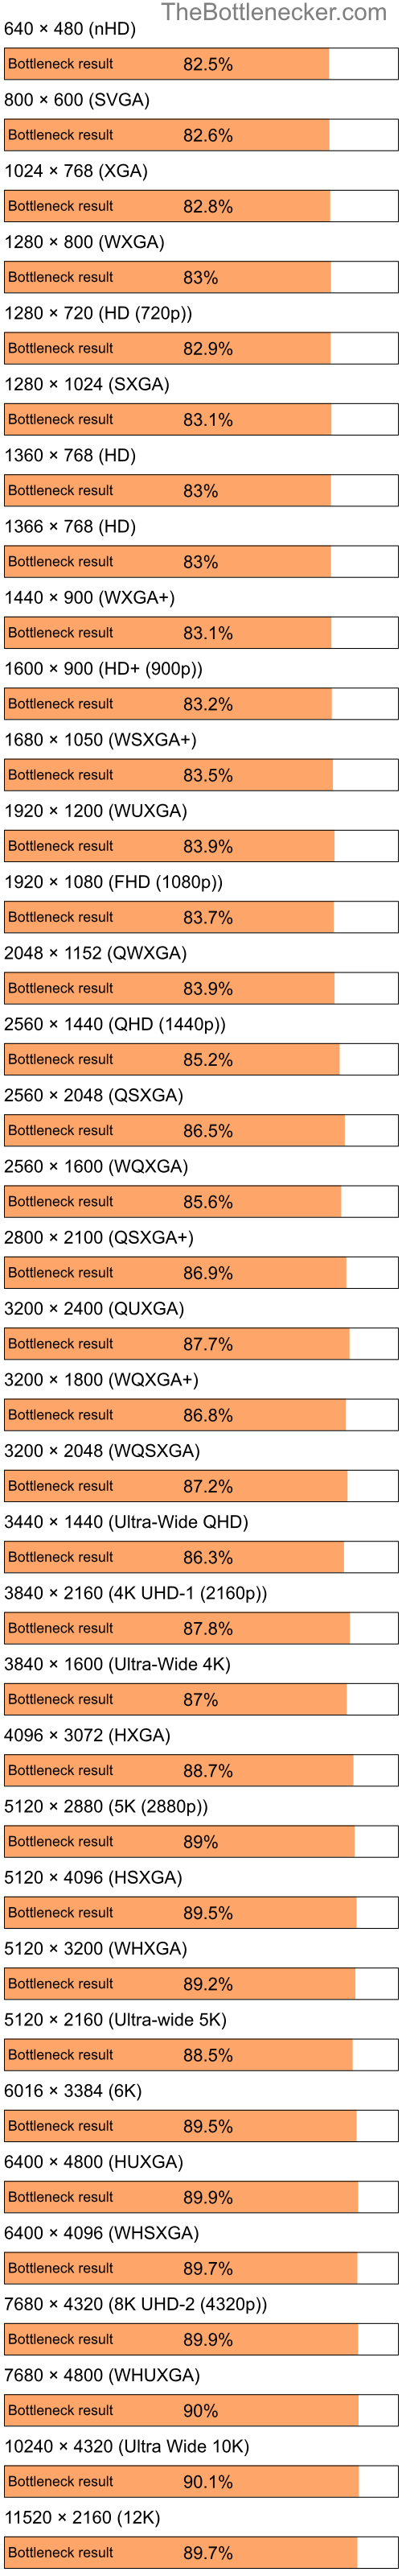 Bottleneck results by resolution for Intel Celeron and NVIDIA GeForce 6200 LE in Graphic Card Intense Tasks